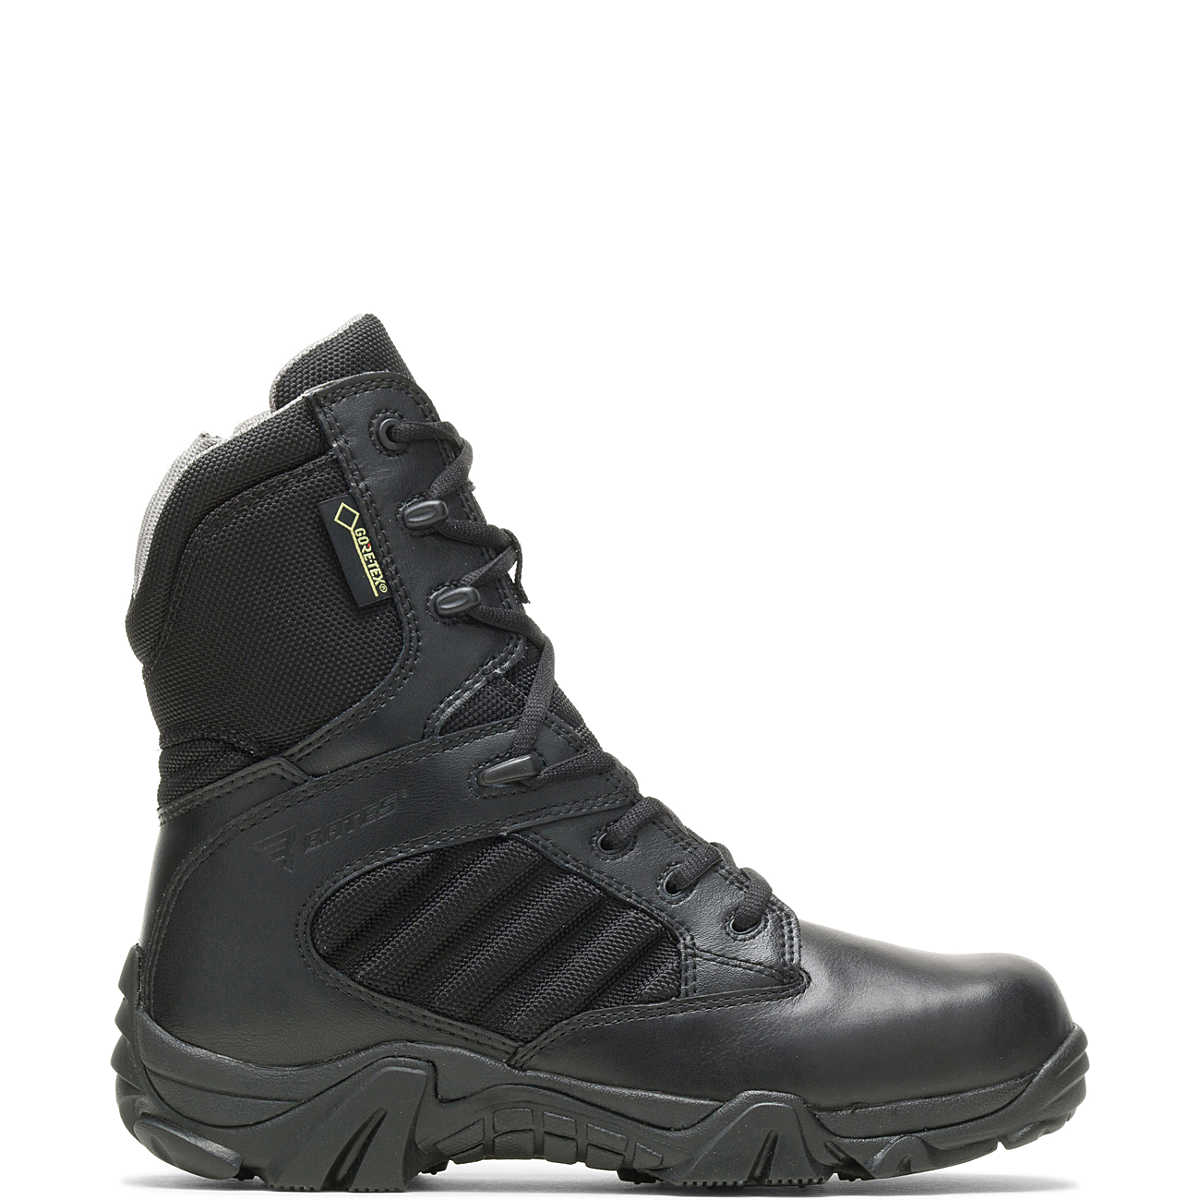 Bates Women's GX-8 Side Zip Boot with Gore-Tex